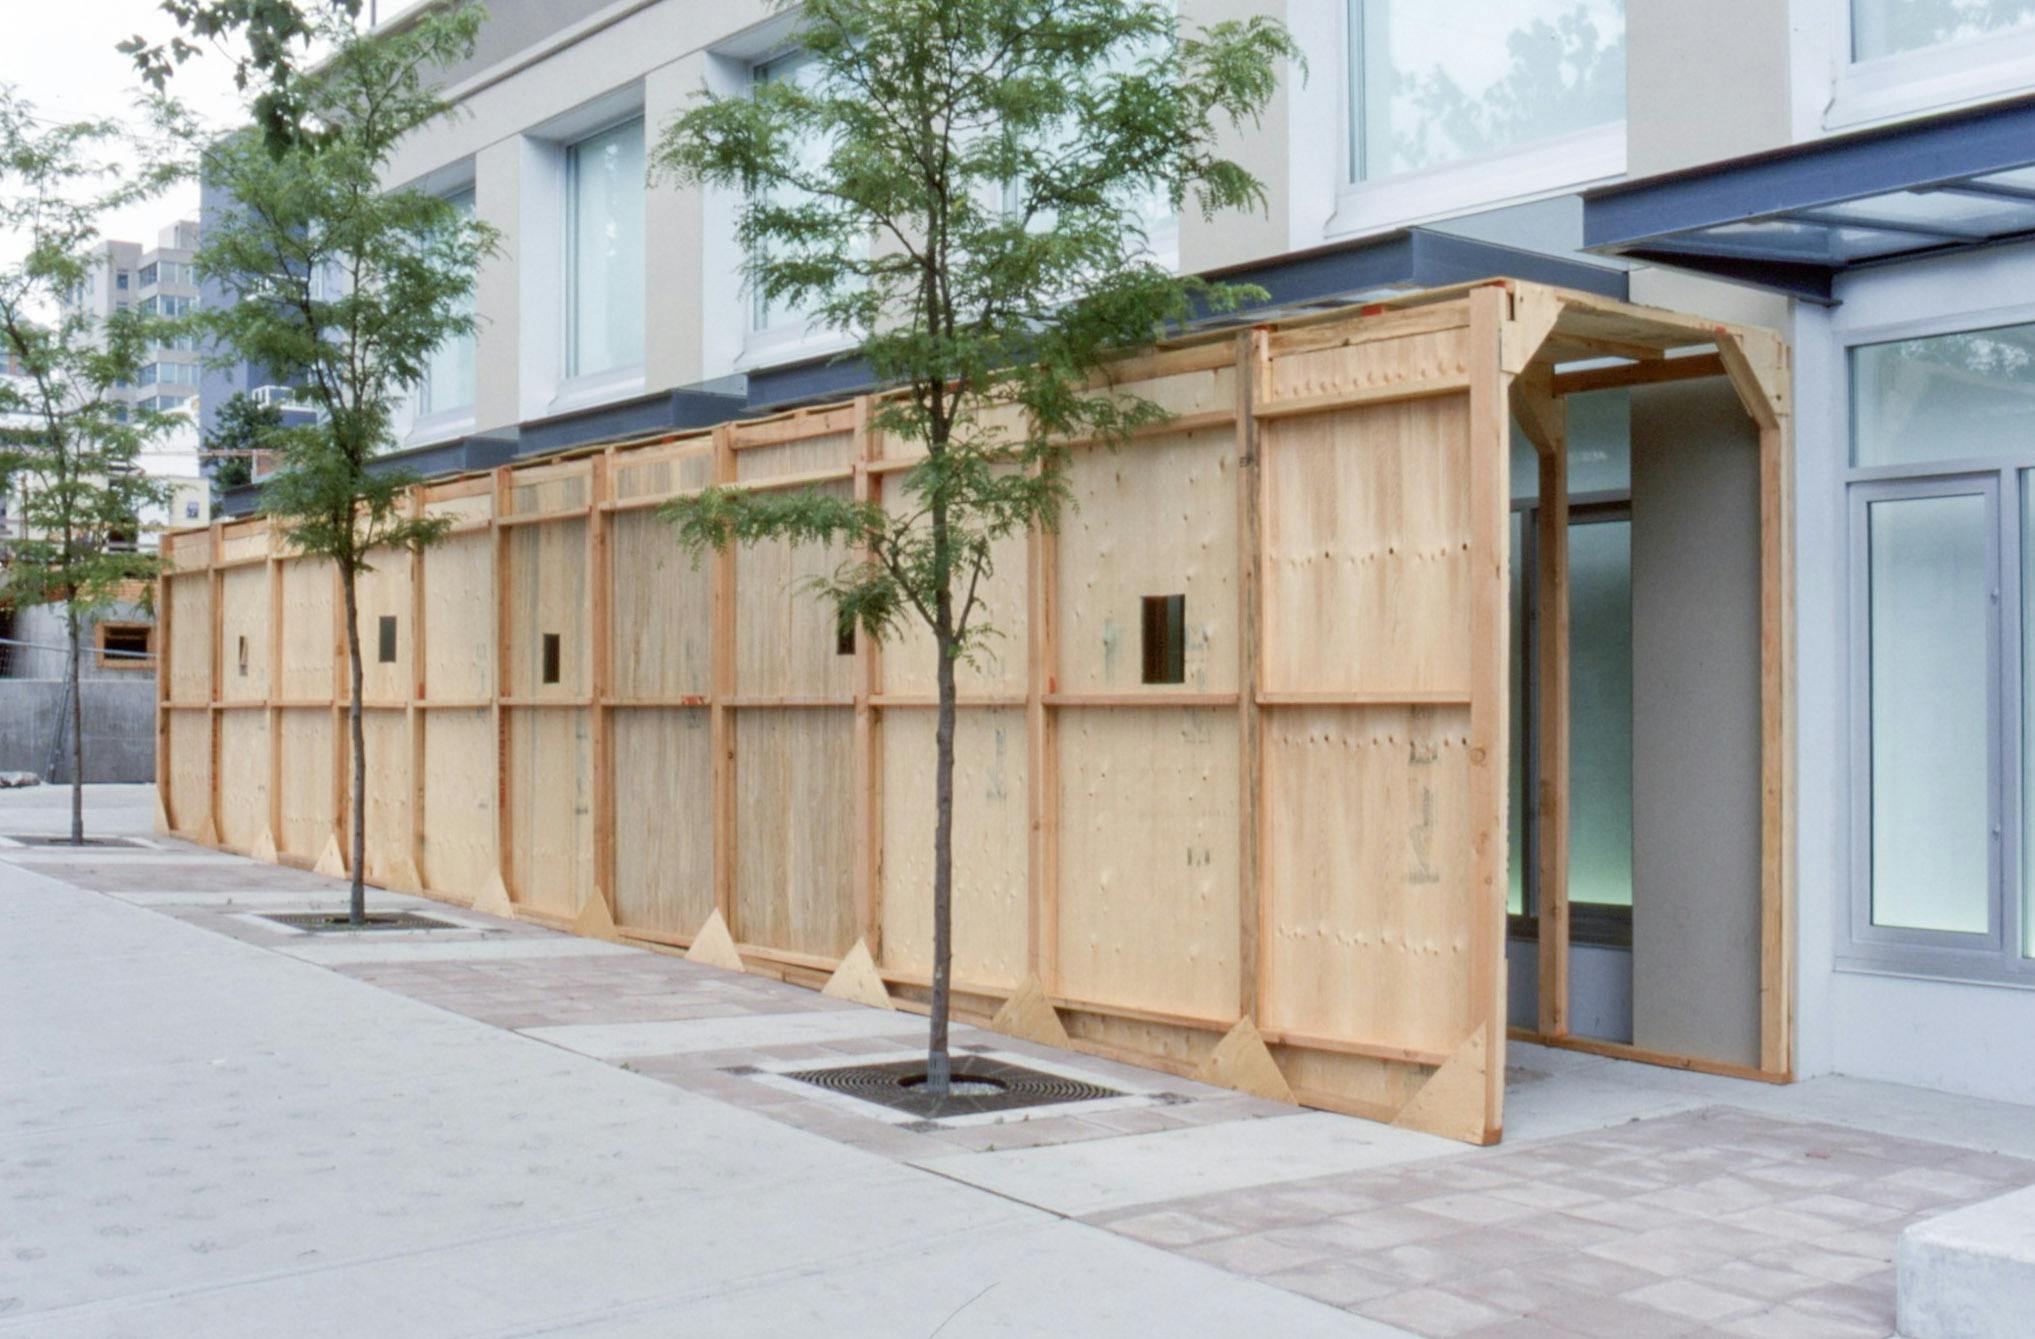 This is Brian Jungen’s installation resembling construction hoardings. Wood tiles with some small windows cover the tunnel. Some trees are planted in front of this installation.